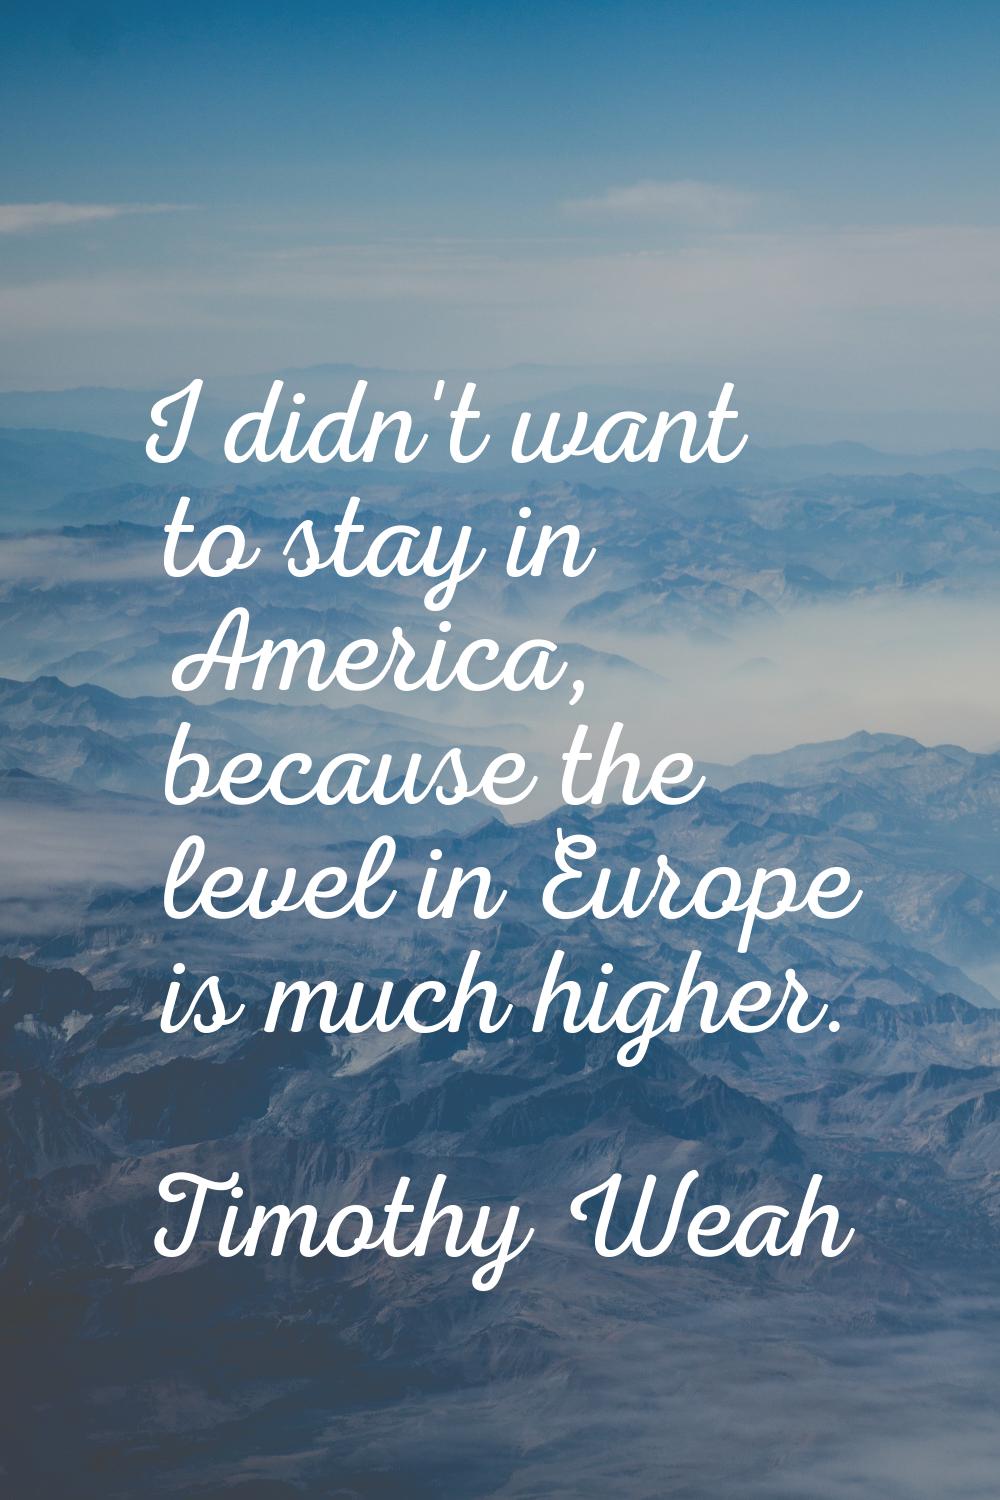 I didn't want to stay in America, because the level in Europe is much higher.